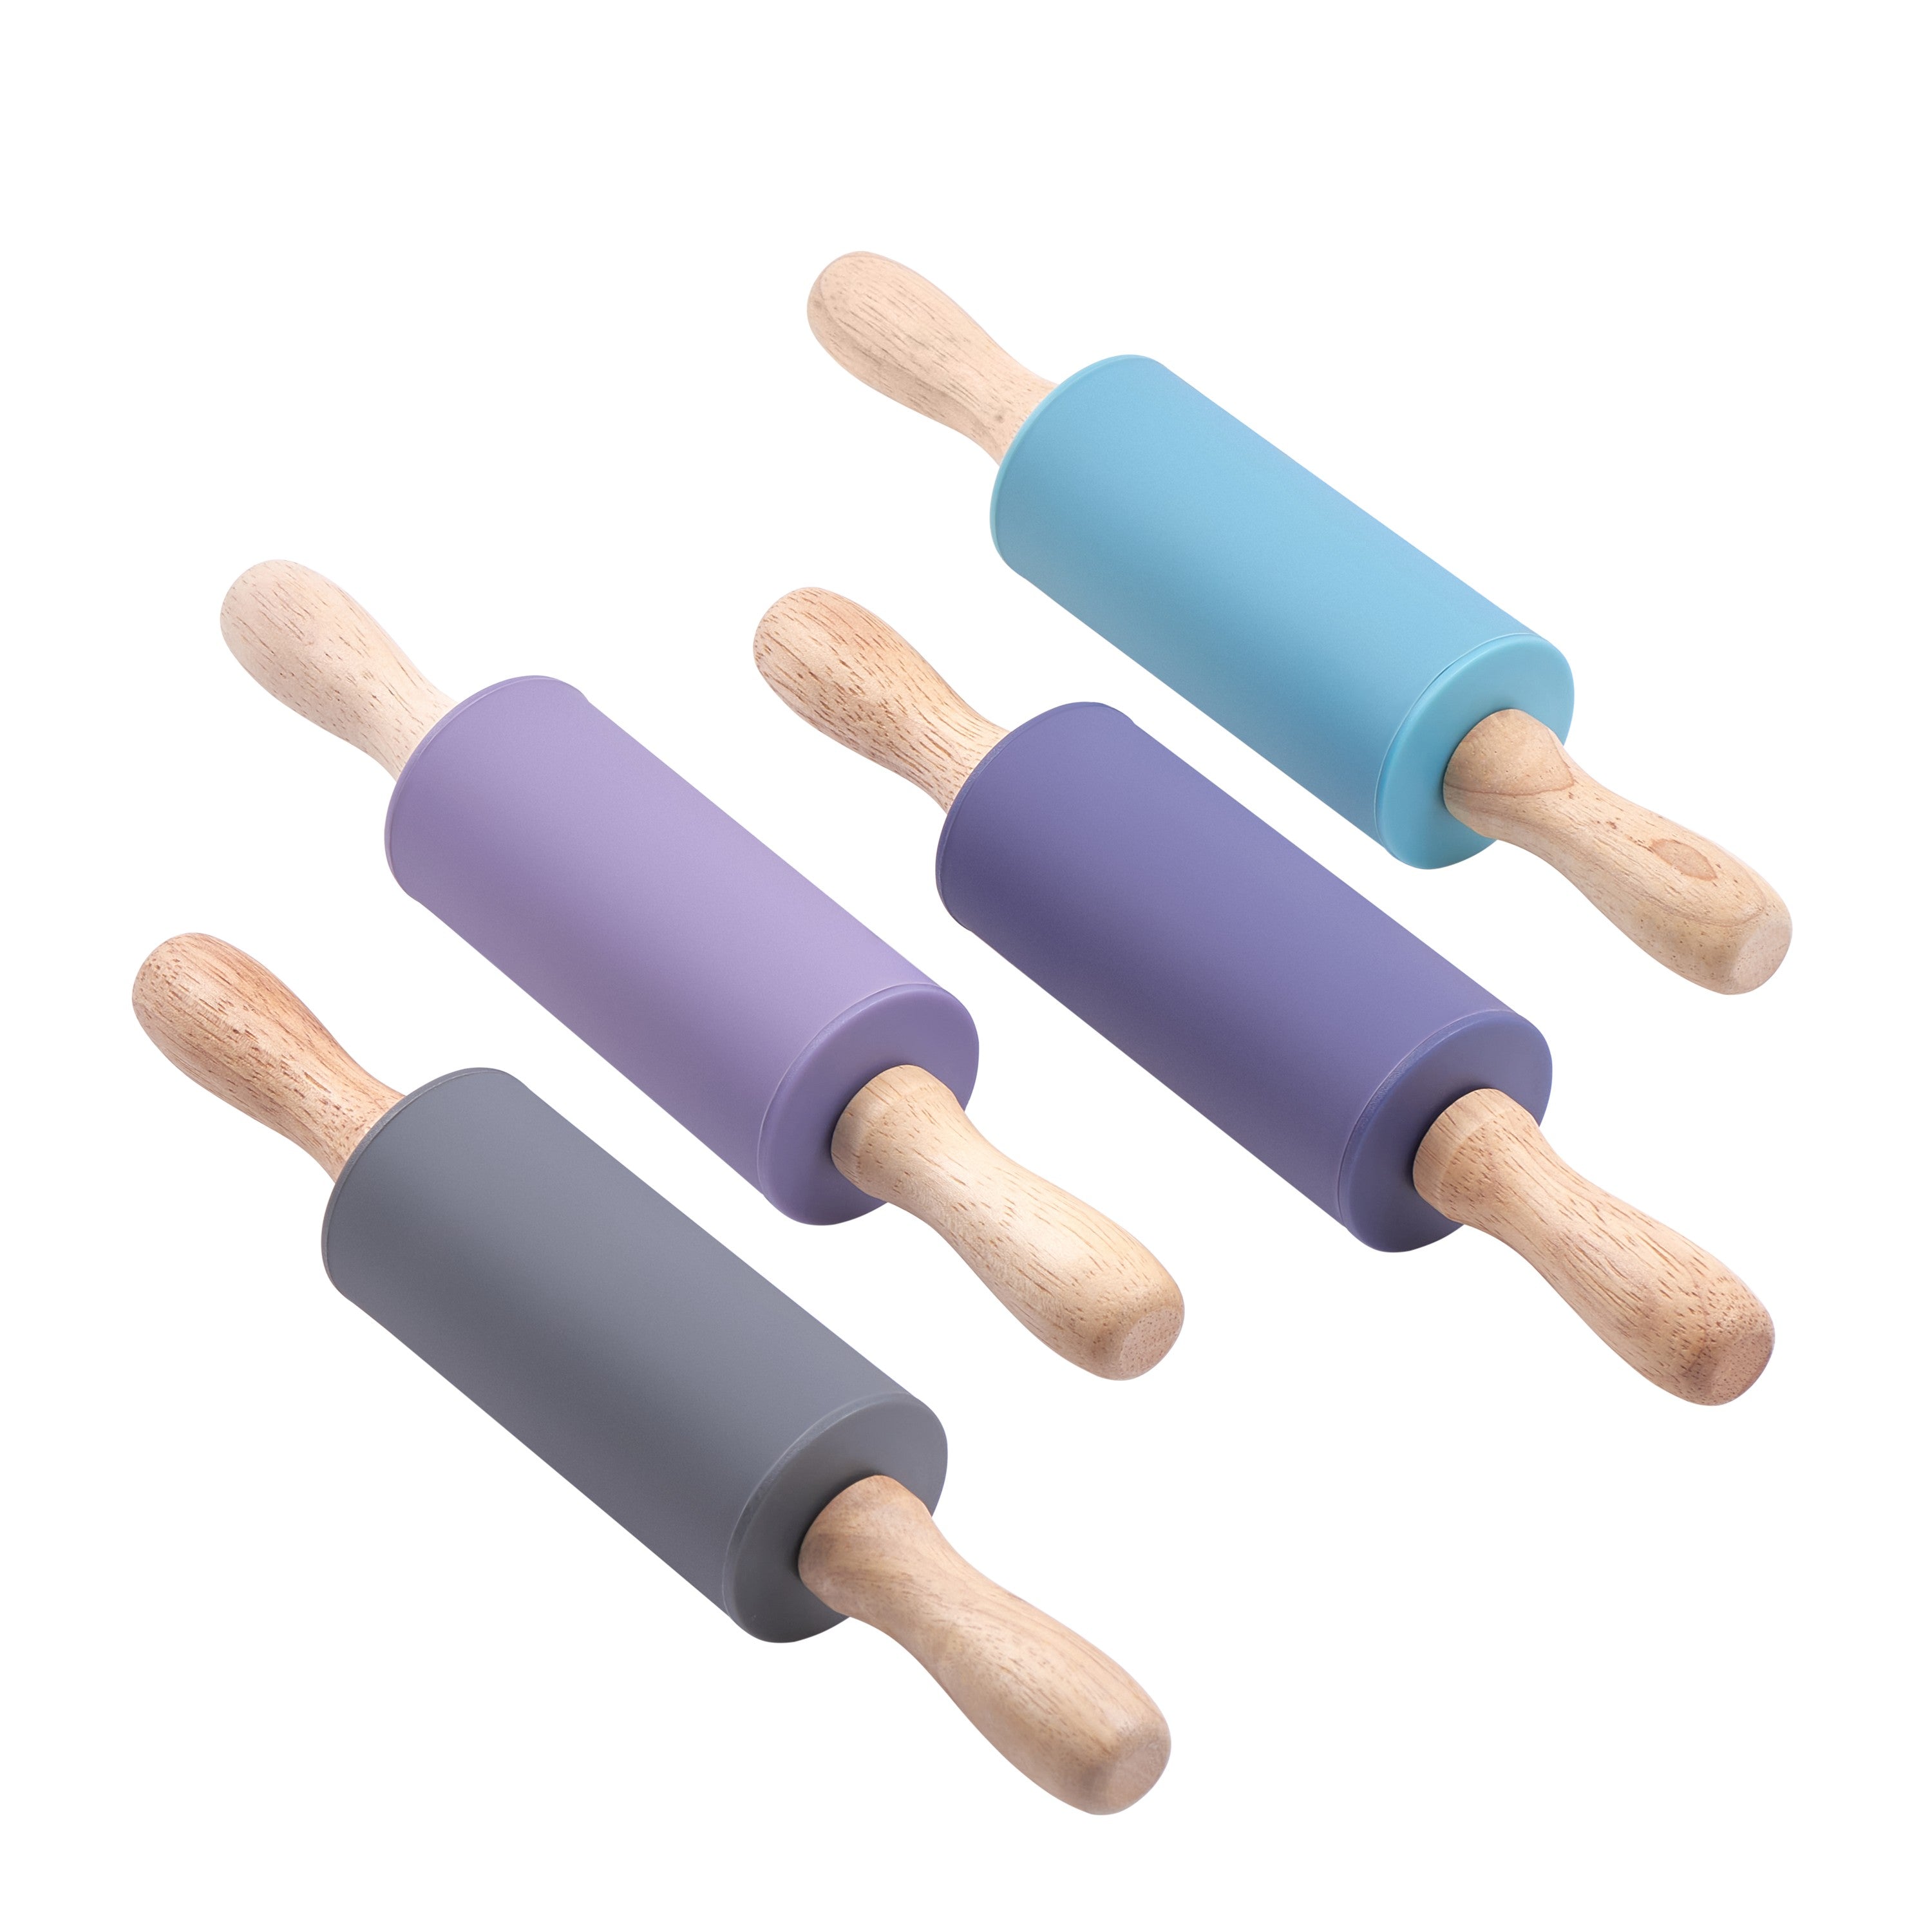 Smart Shef silicone rolling pin